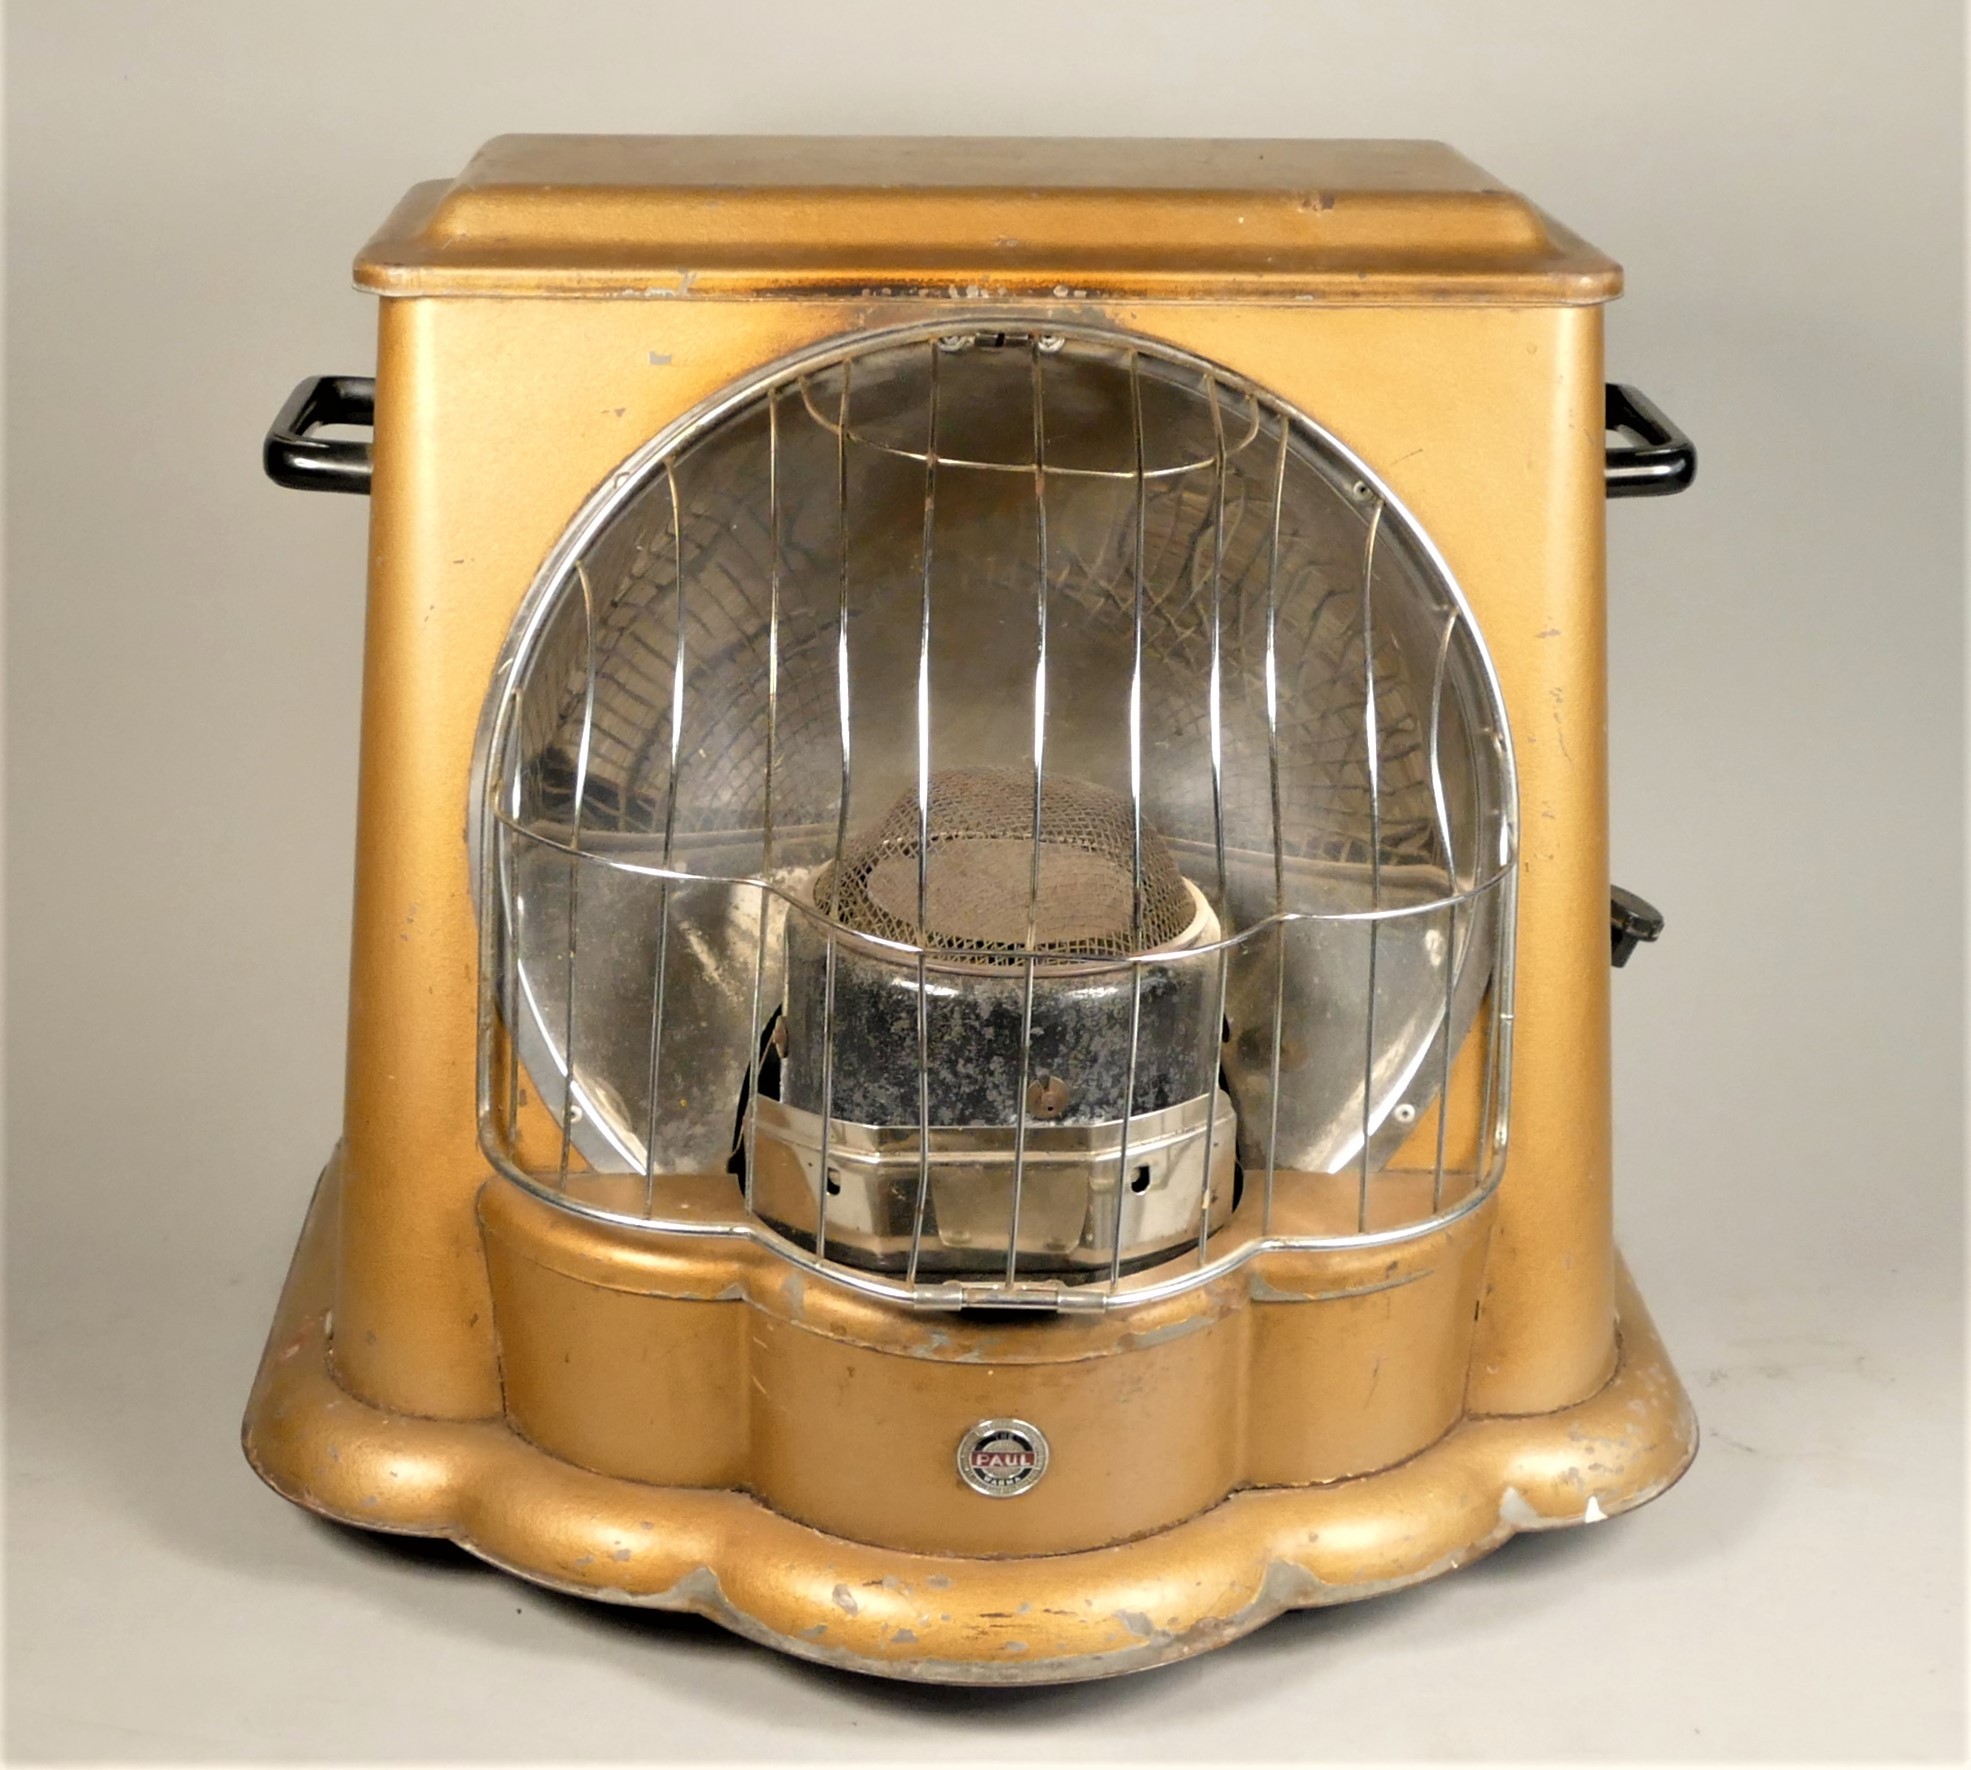 A 1950s Art Deco style paraffin heater by Paul Warma, original and complete with instructions.